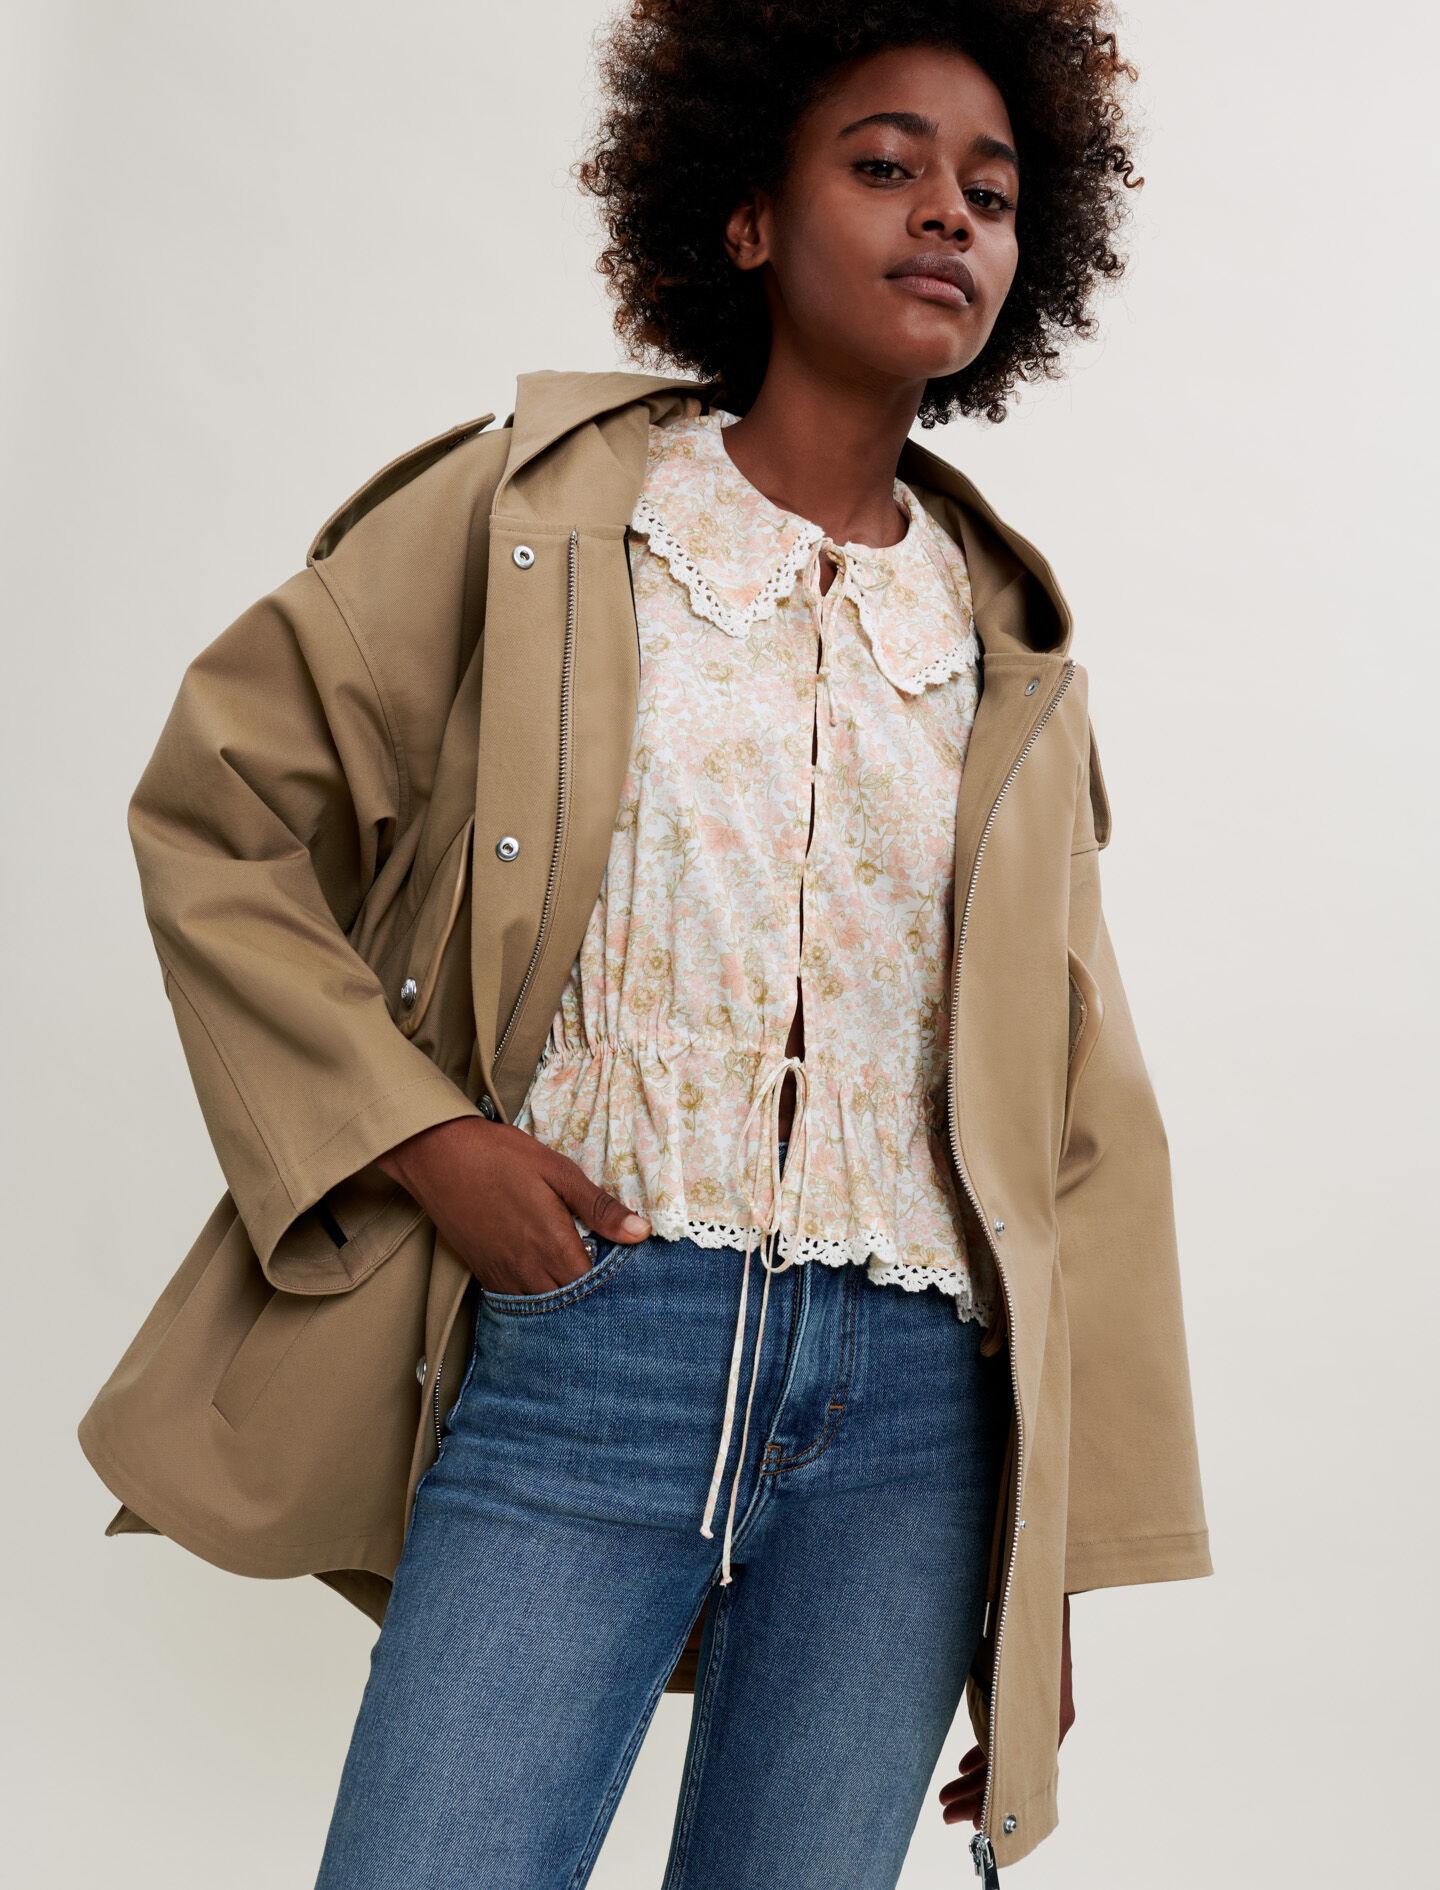 Maje Oversized Cotton Coat in Natural | Lyst